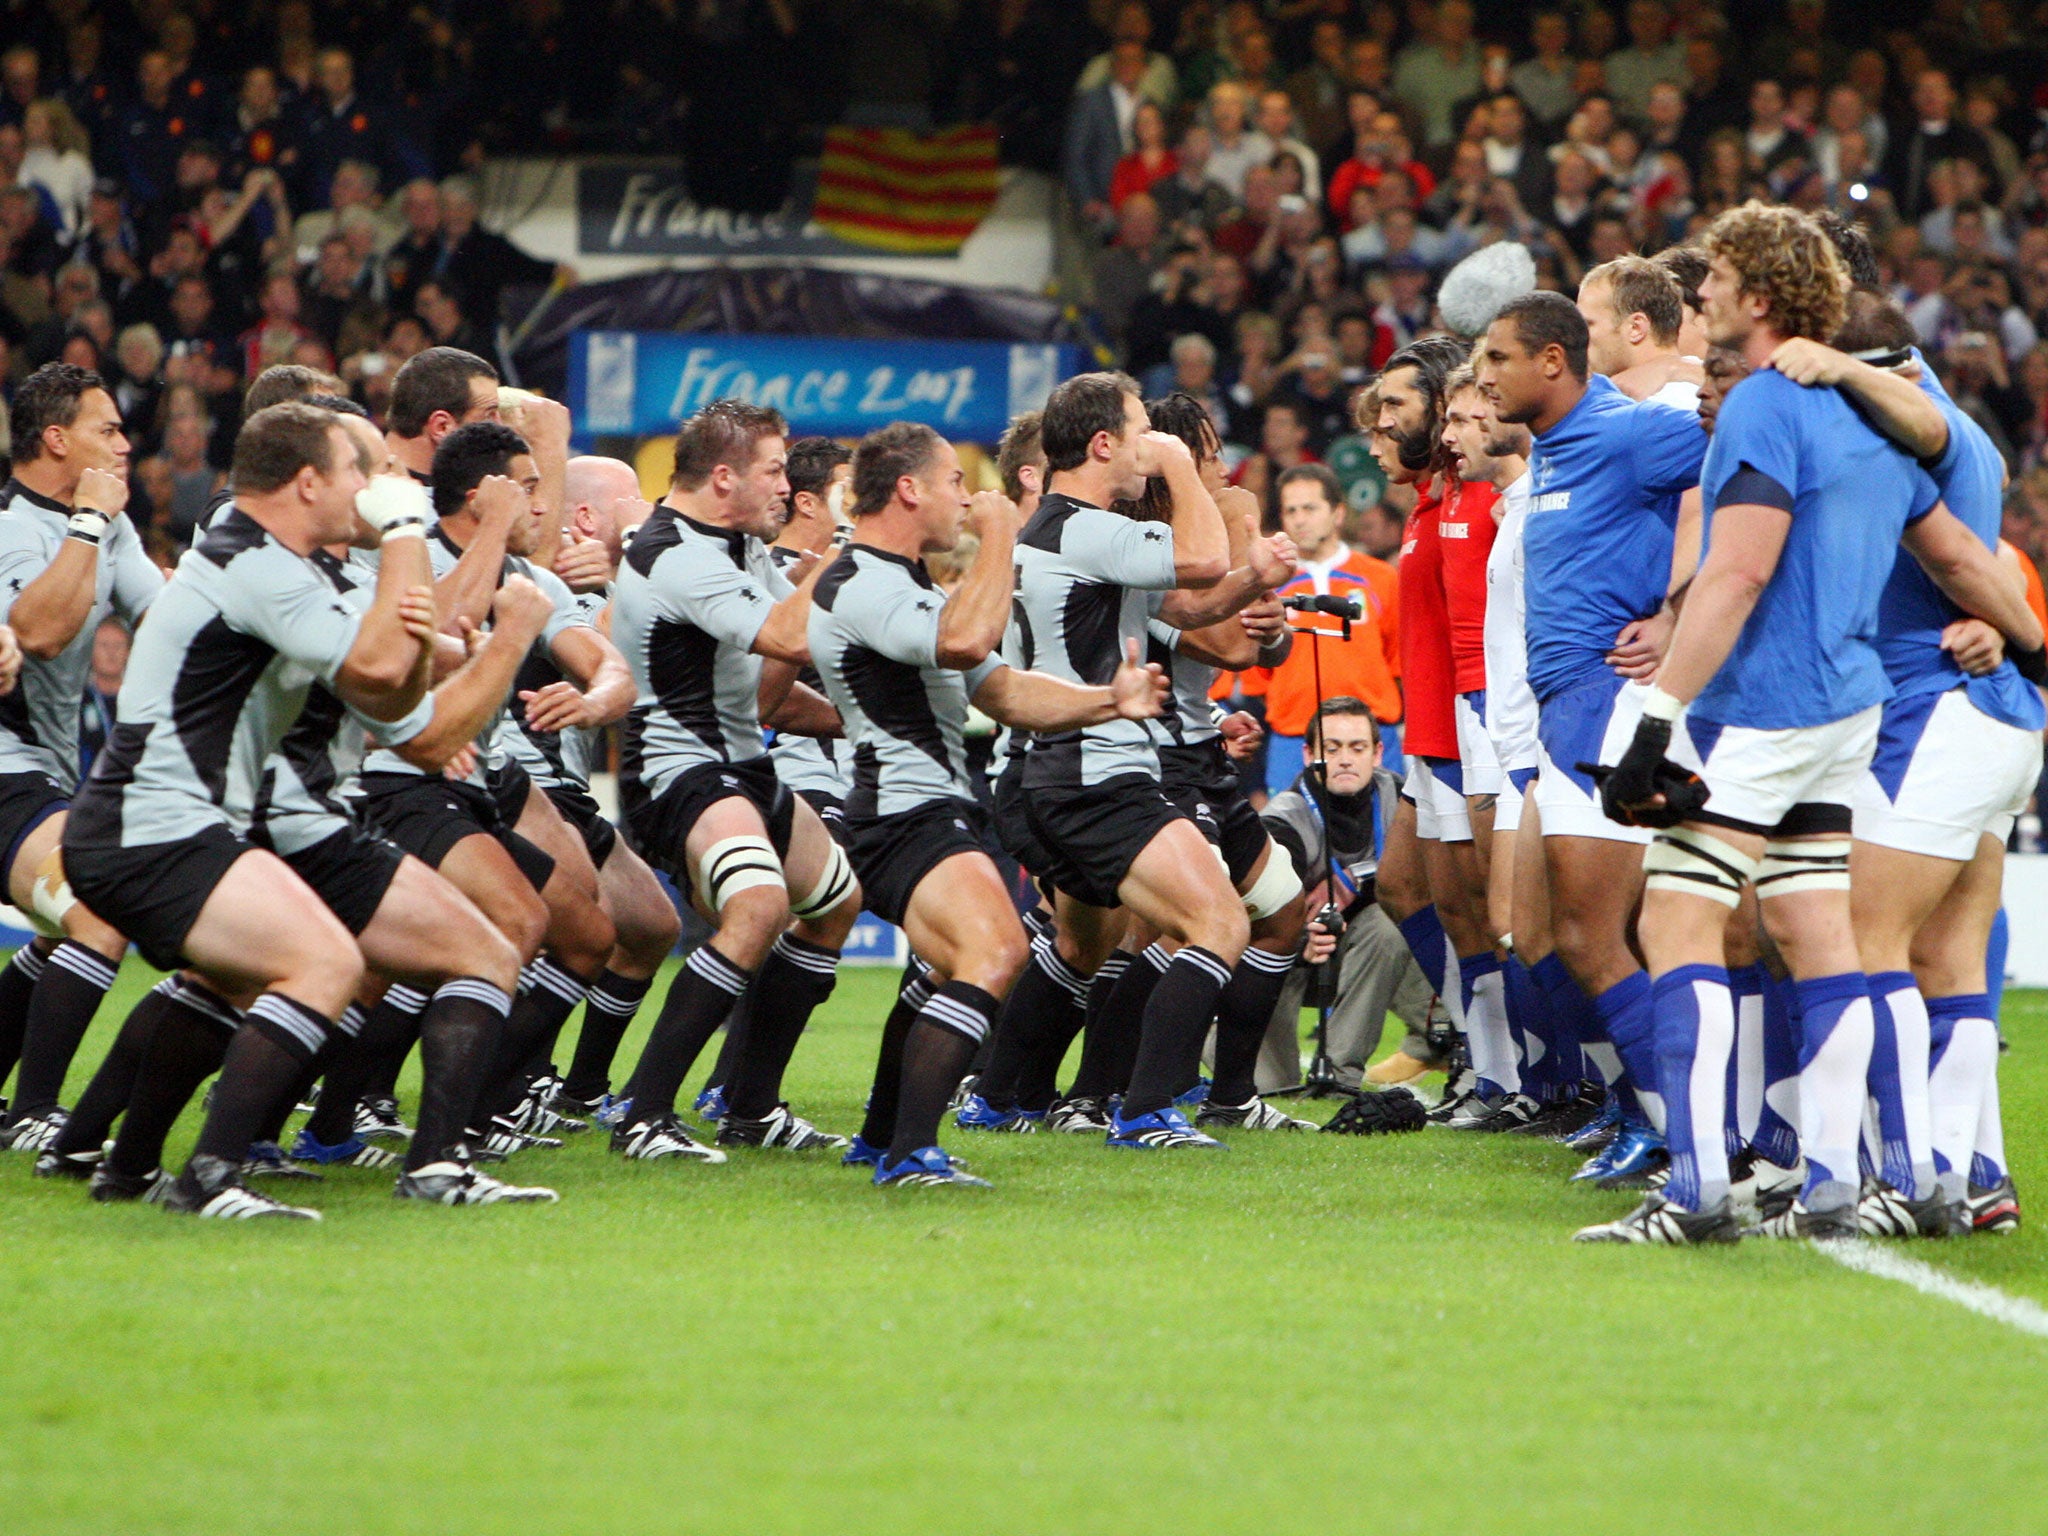 France face the Haka ahead of their 2007 Rugby World Cup quarter-final with New Zealand